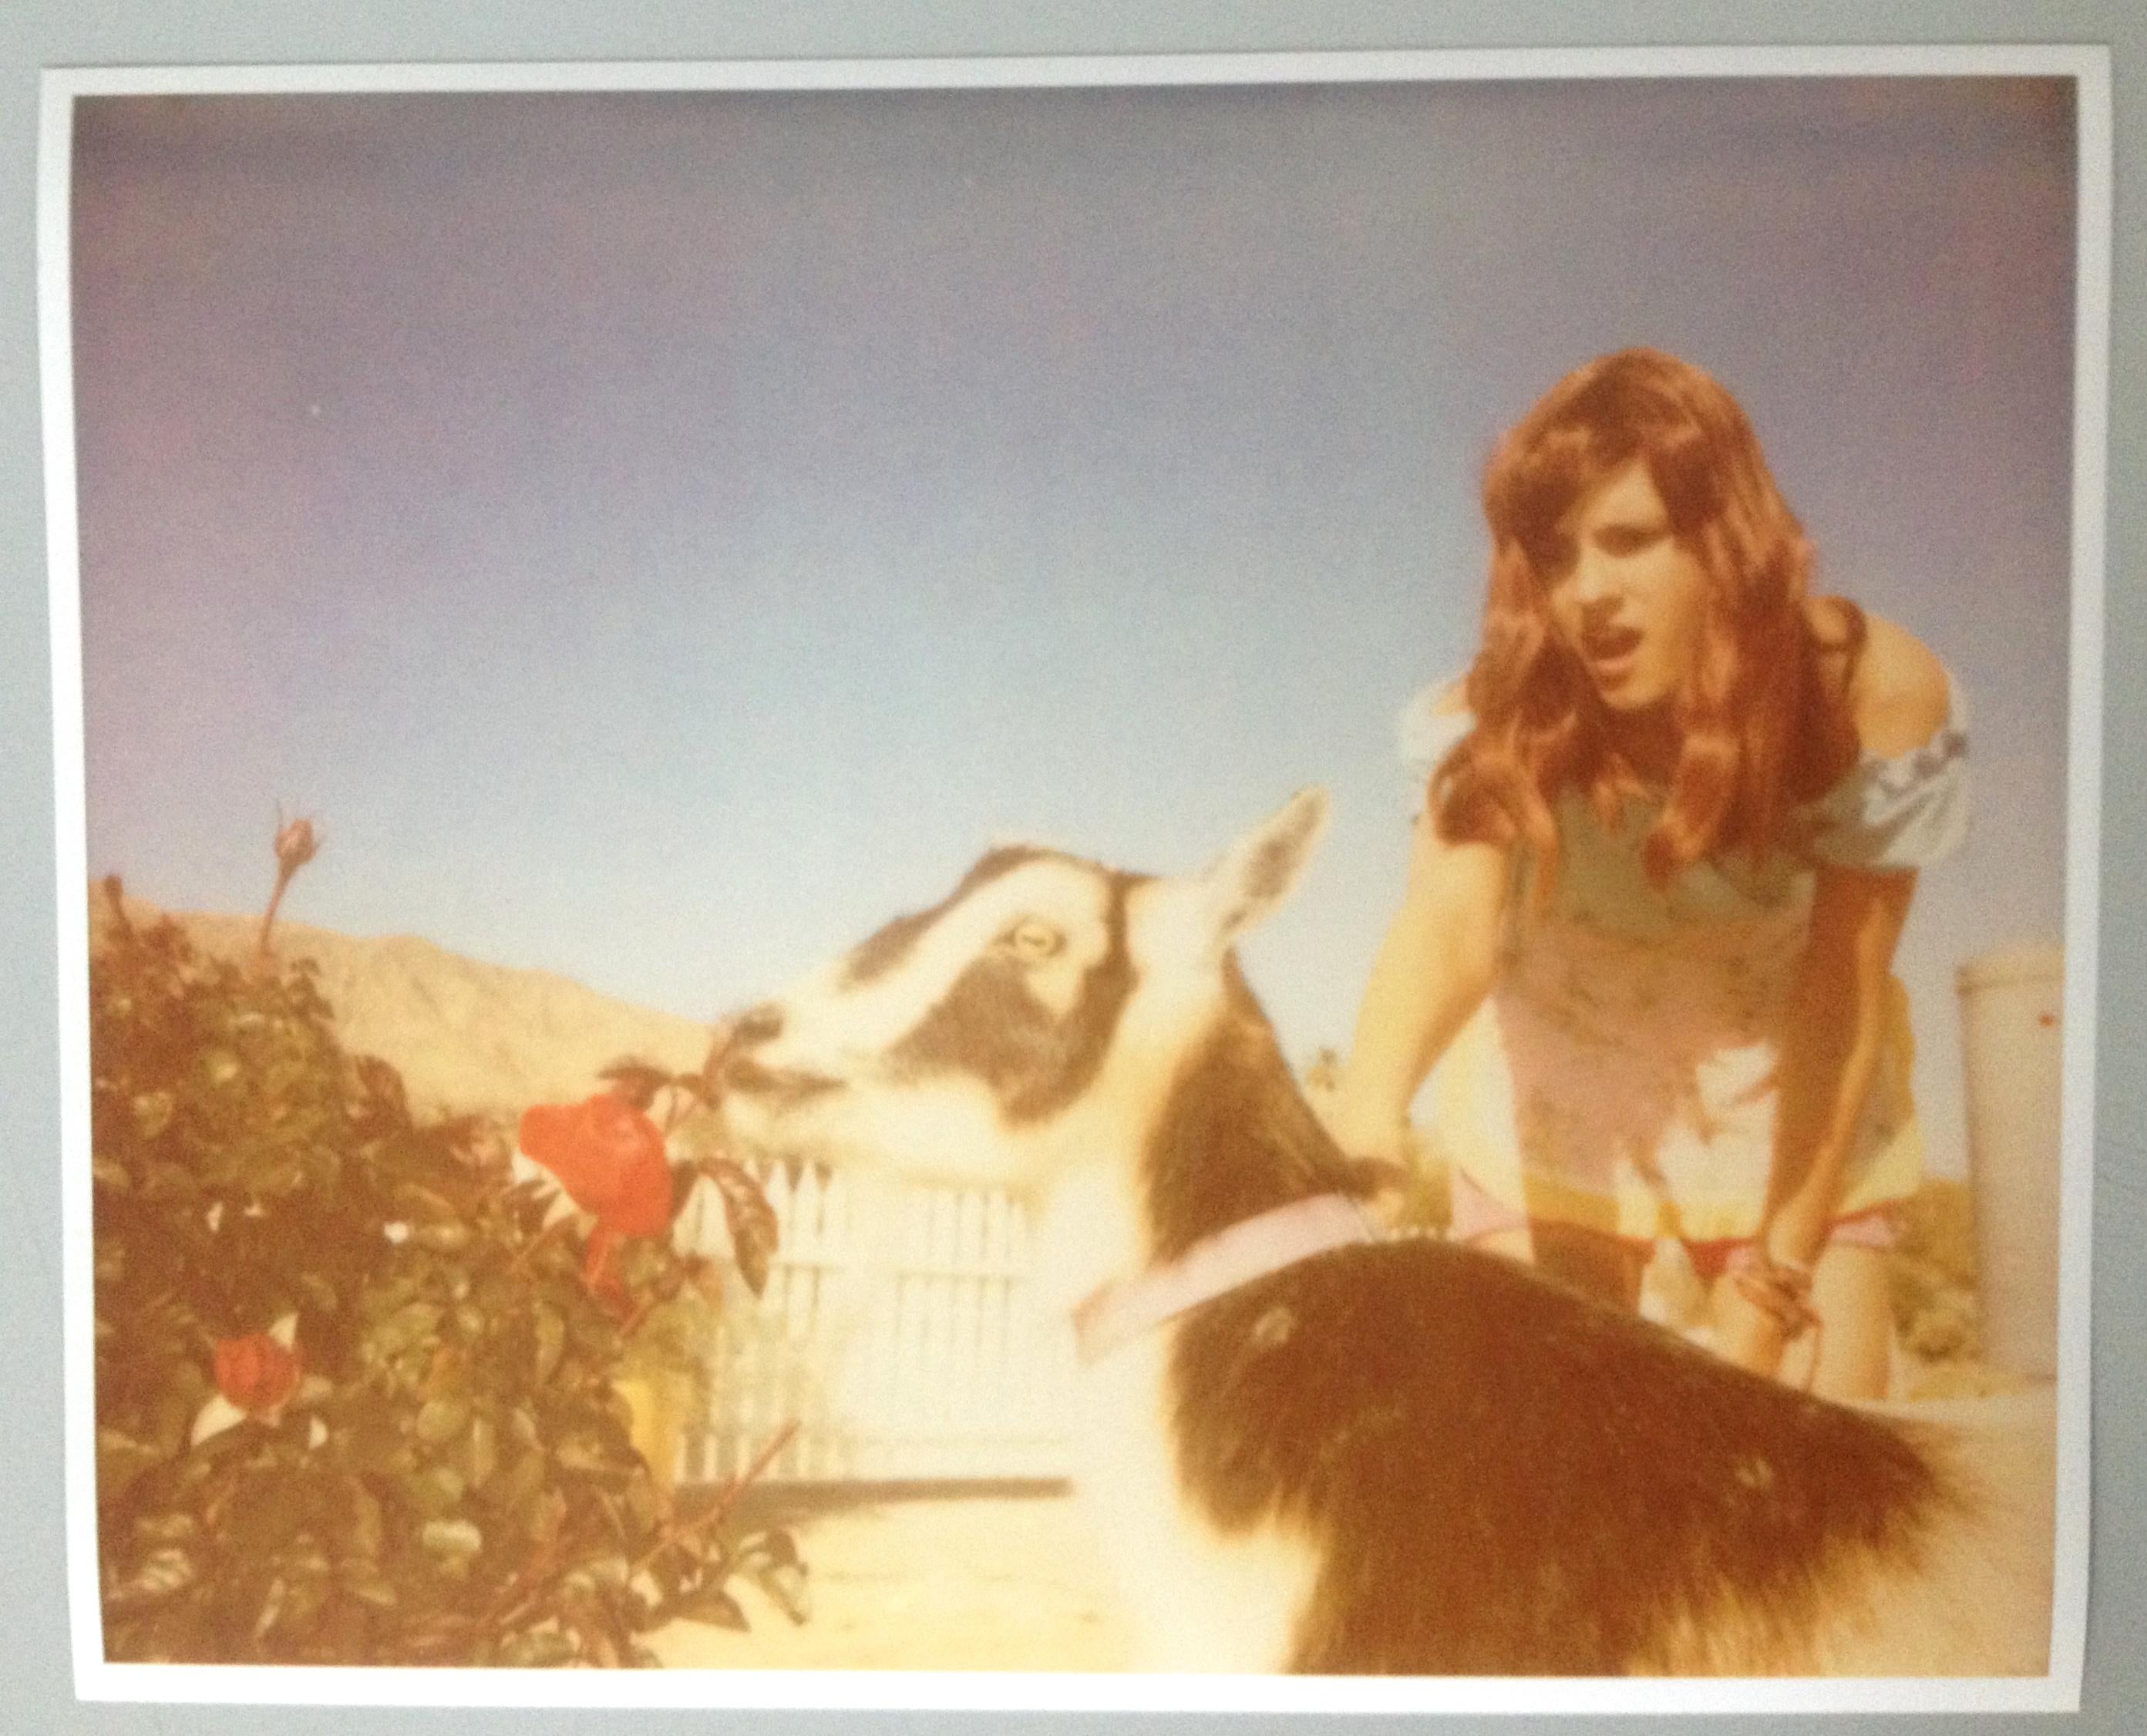 Heather and Zeuss the Goat featuring Heather Megan Christie - Polaroid, Color - Contemporary Photograph by Stefanie Schneider